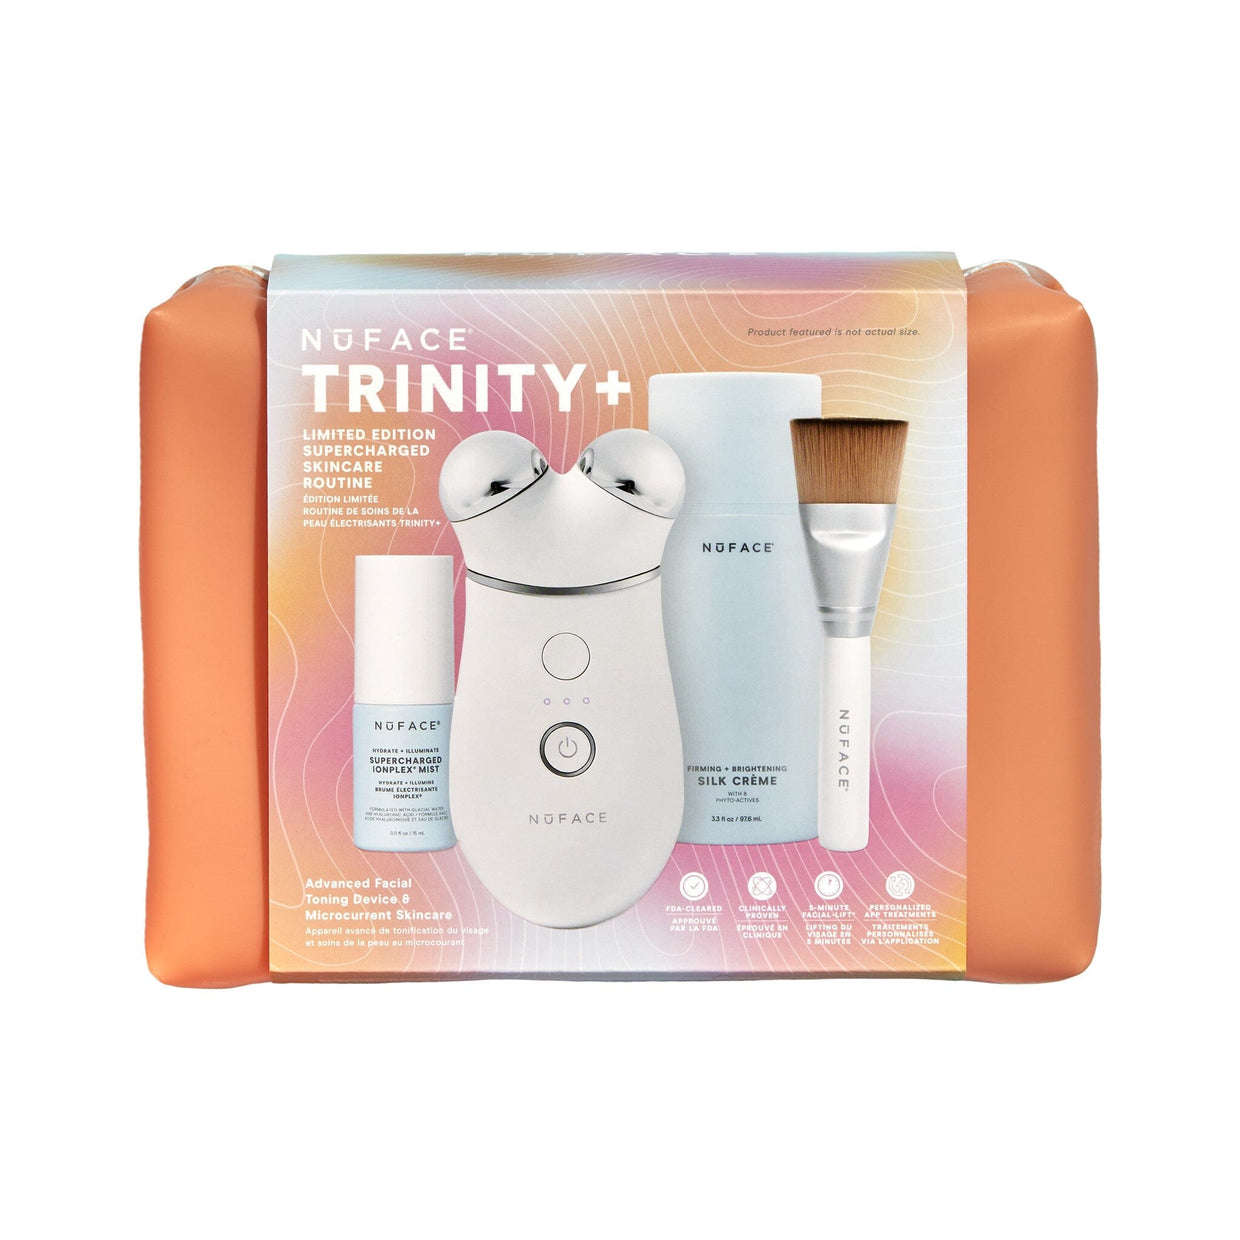 NuFACE TRINITY+ Supercharged Skincare Routine Limited Edition Spring Gift Set ($509 Value) NuFACE Shop at Exclusive Beauty Club